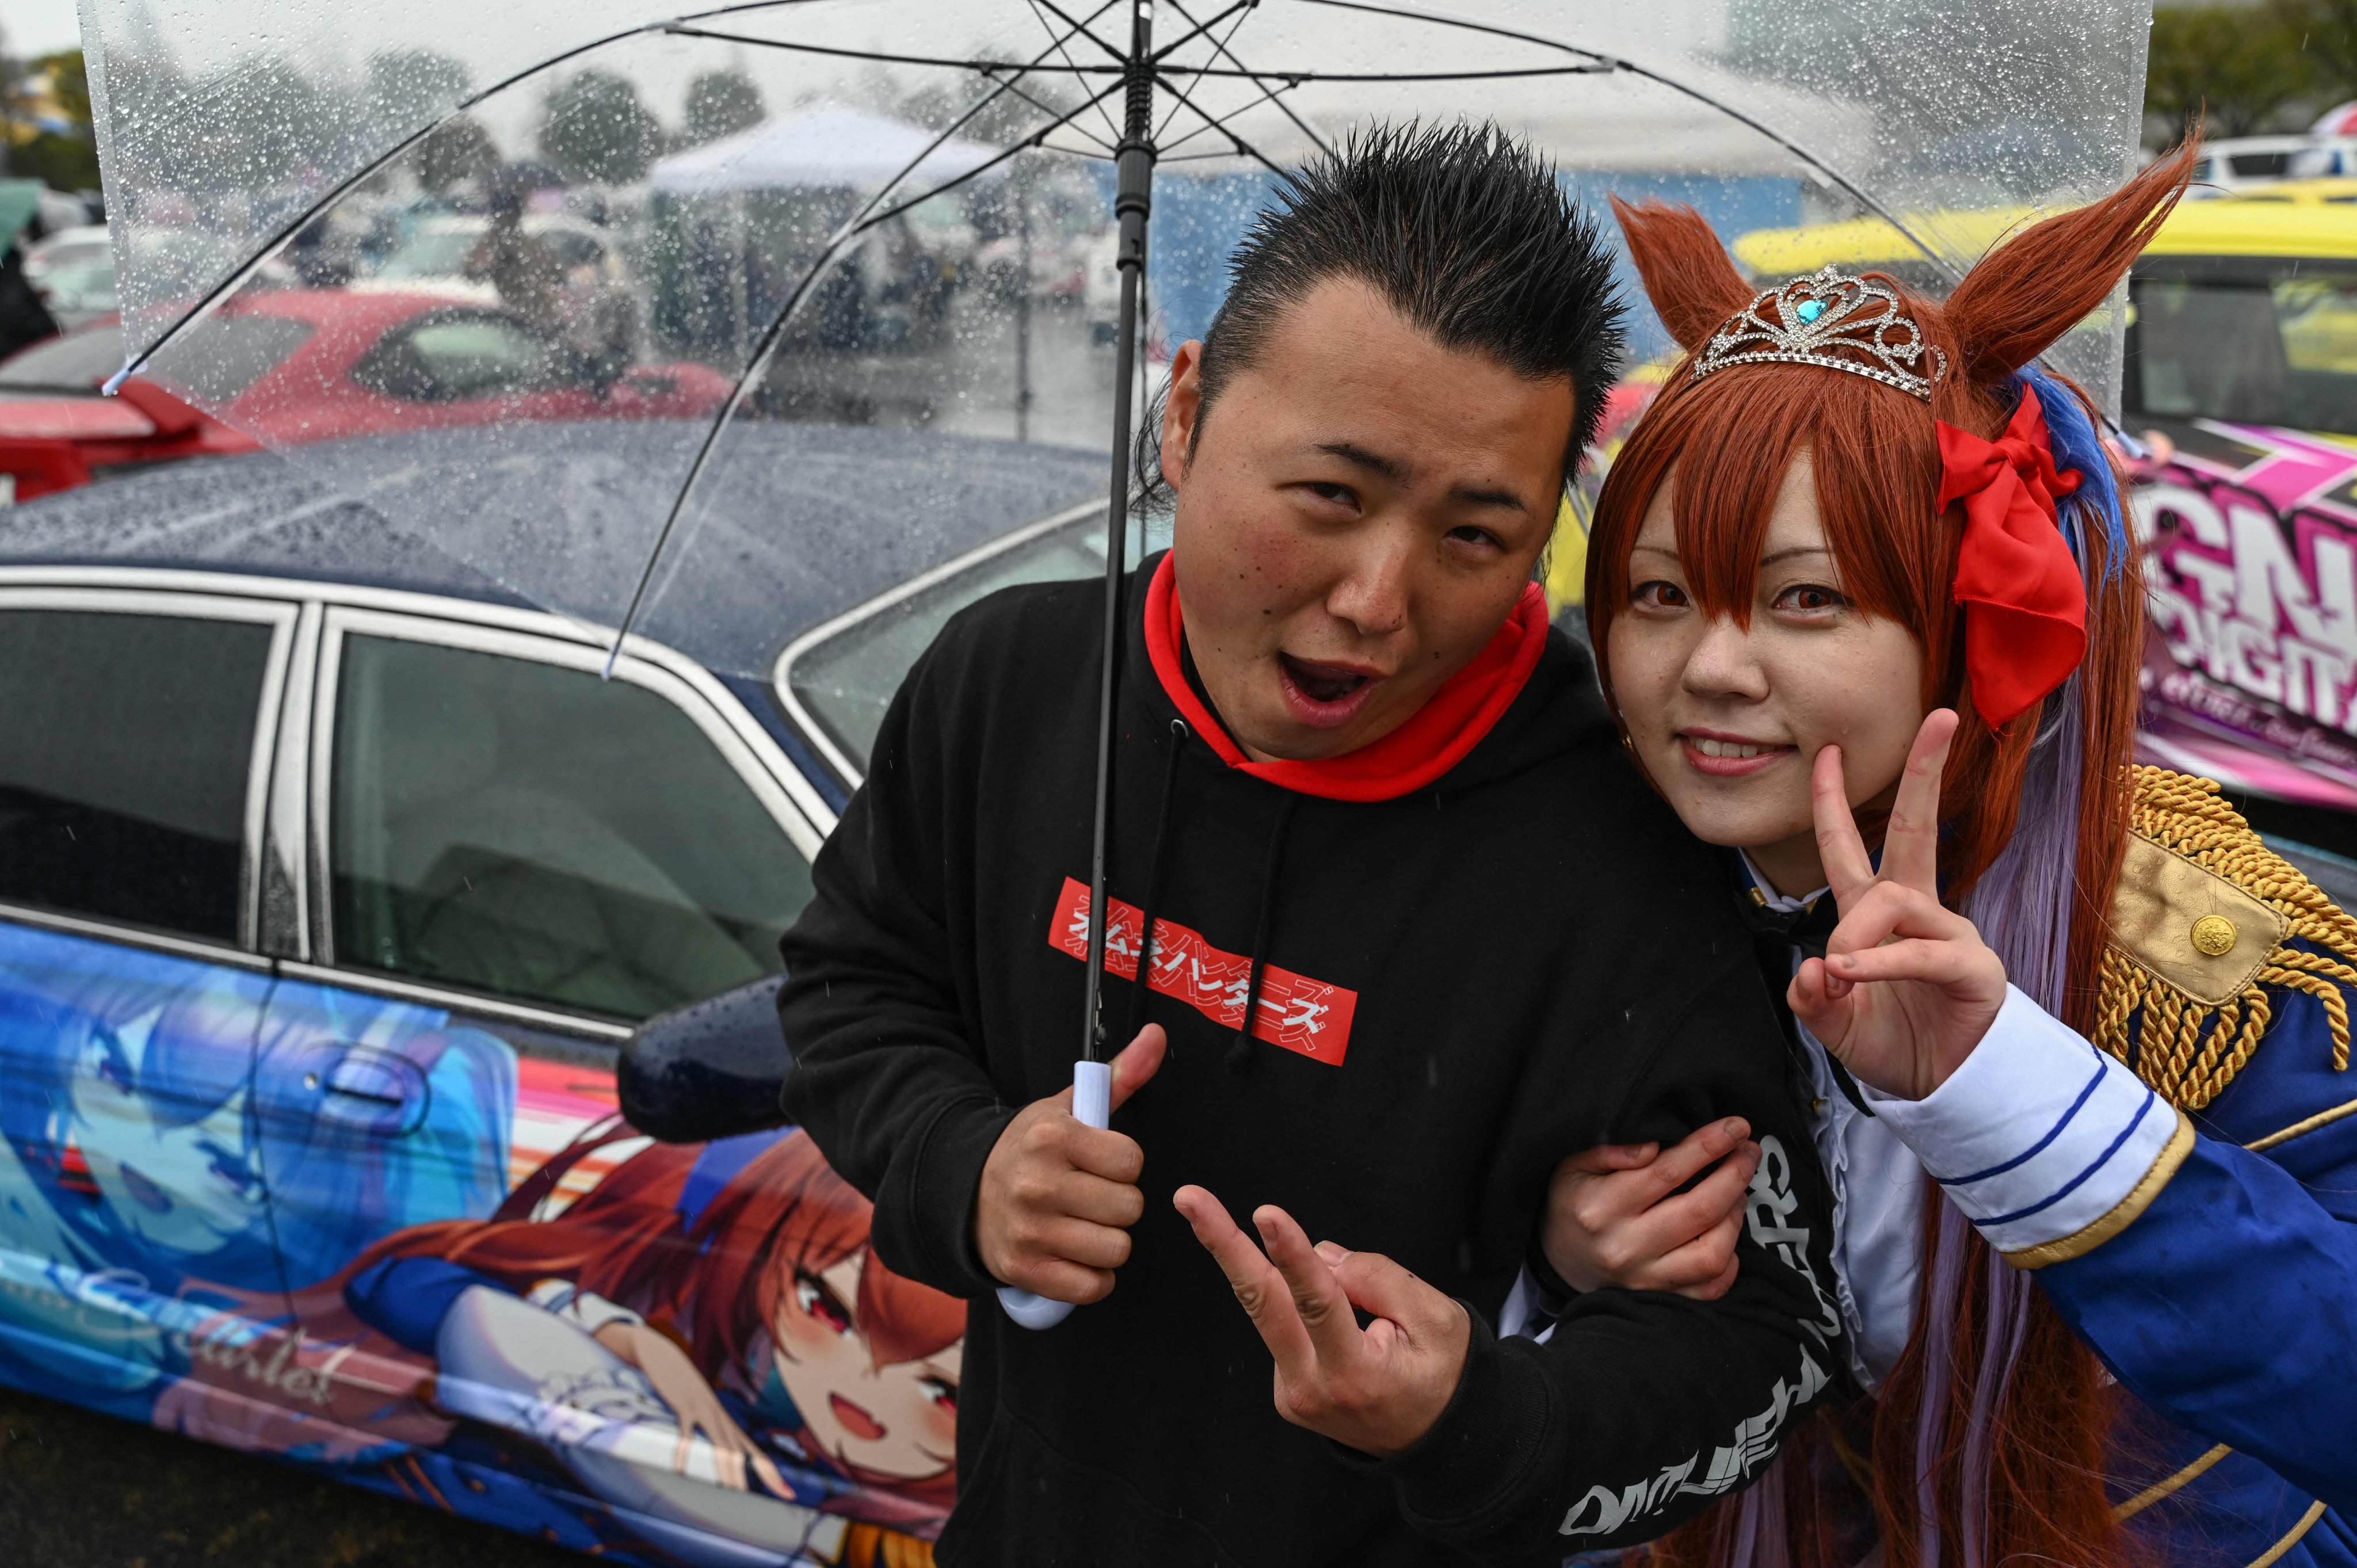 Details more than 147 cars with anime wraps latest - highschoolcanada.edu.vn